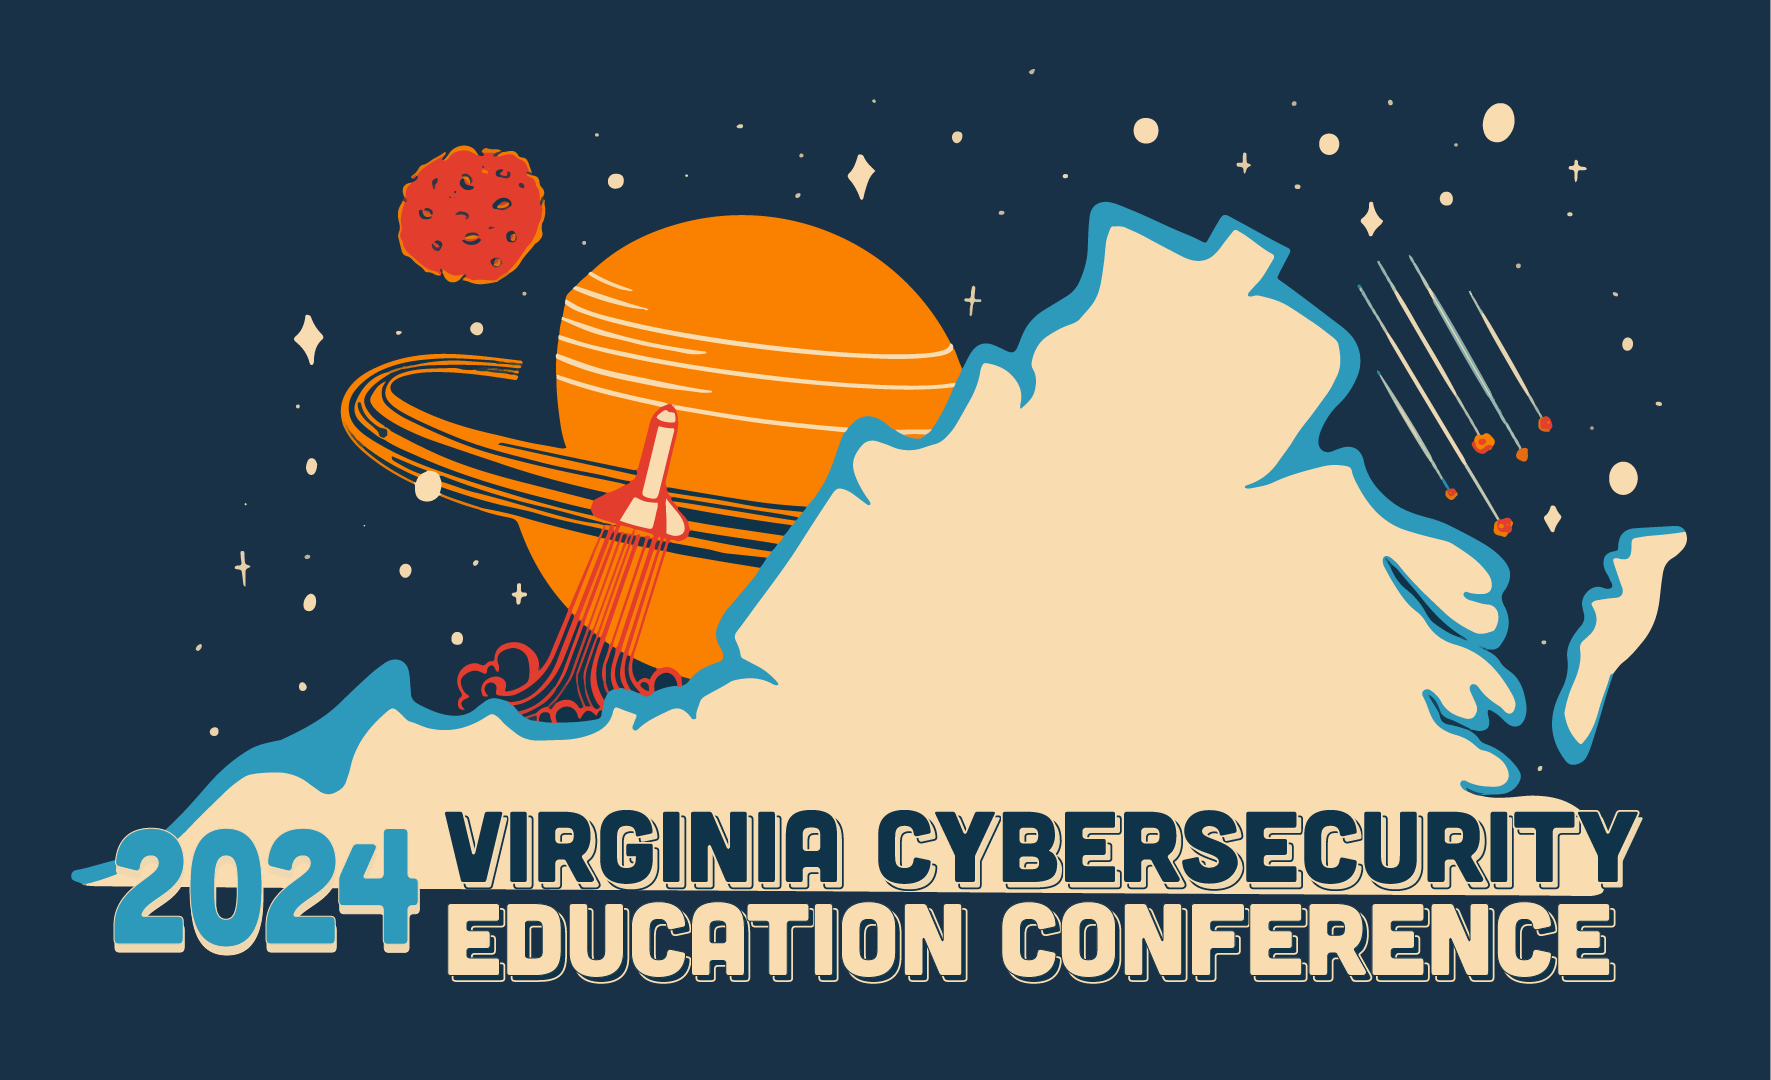 Virginia Cybersecurity Education Conference